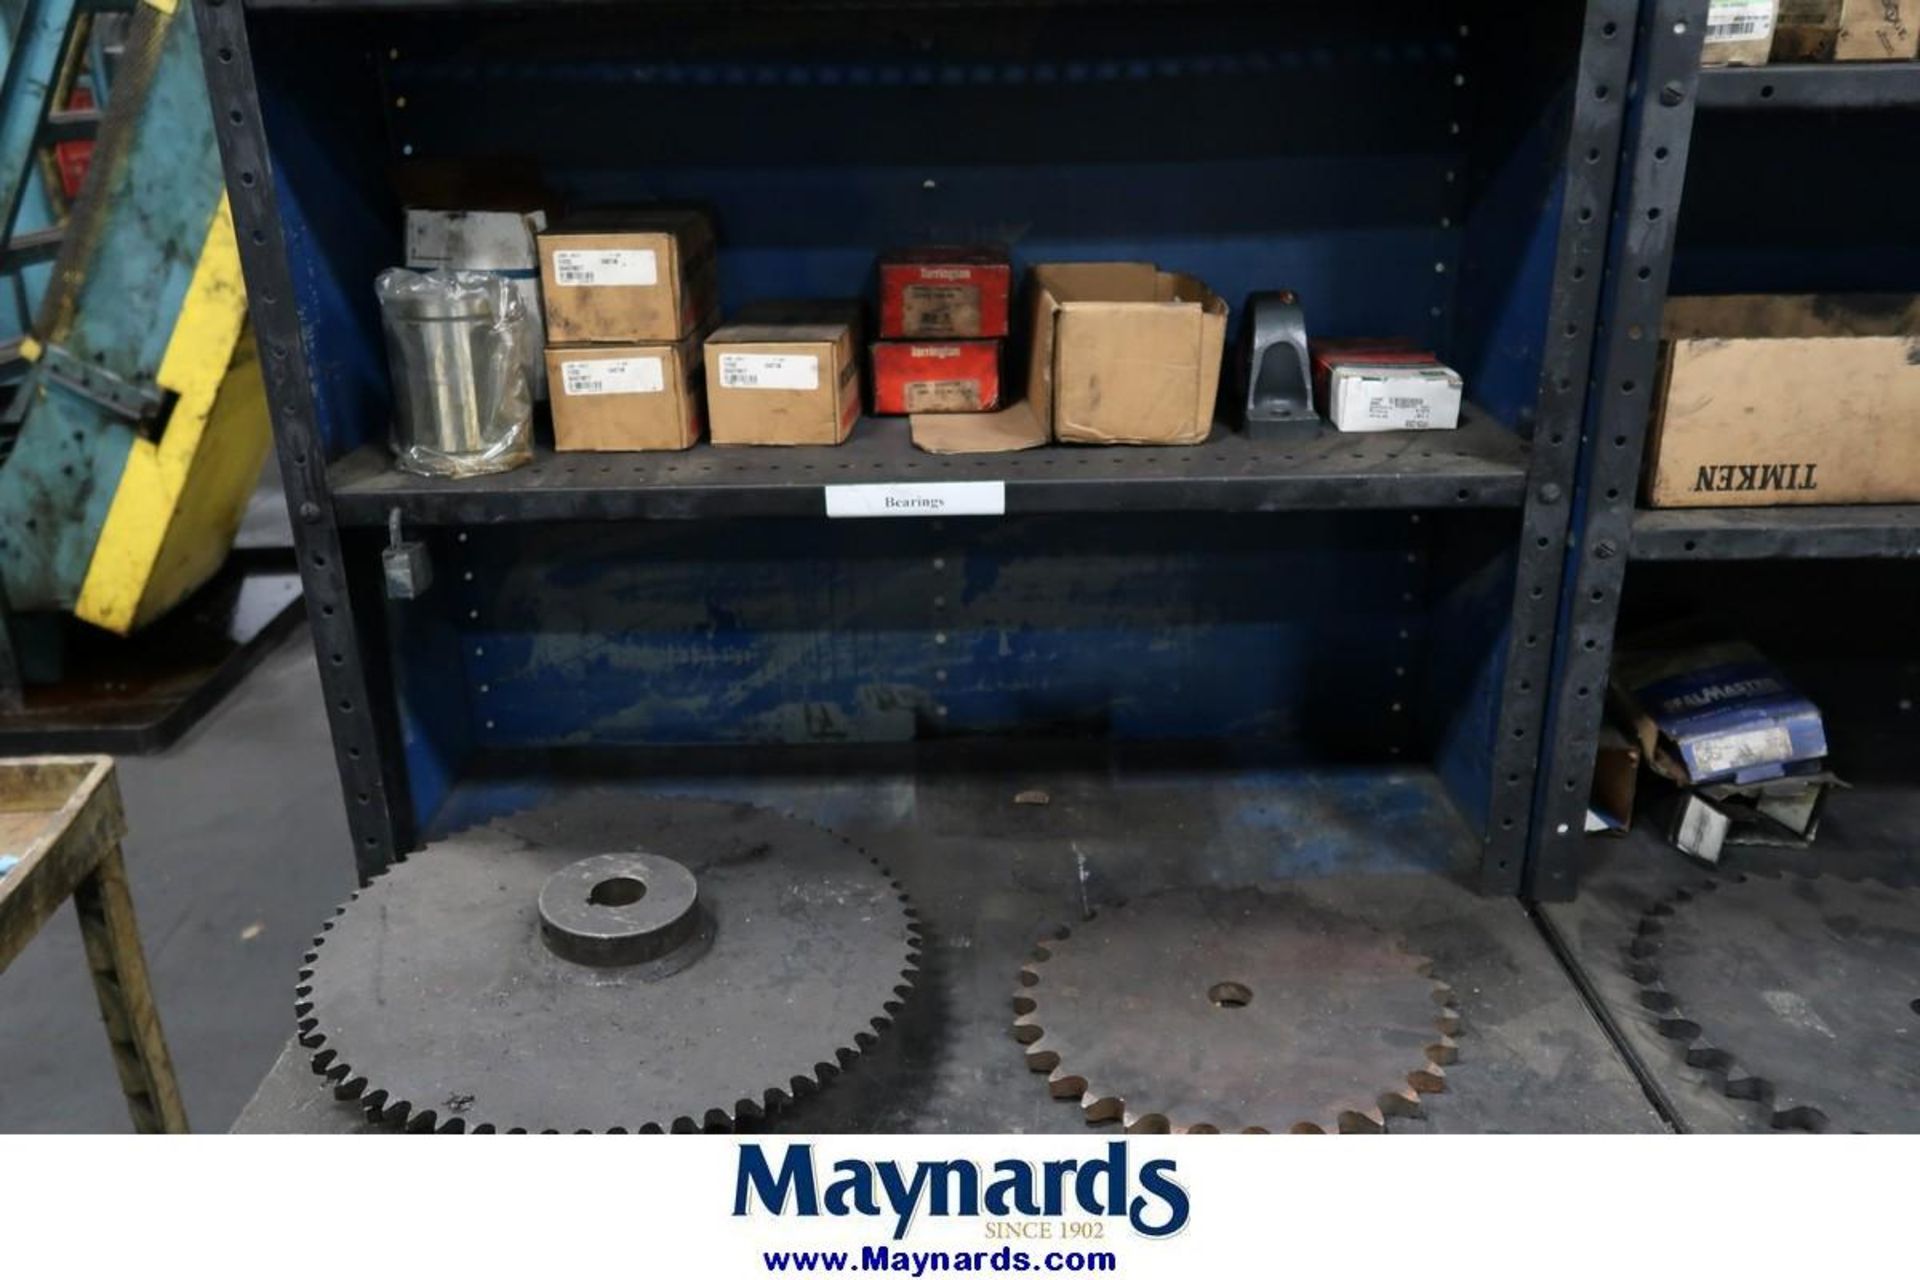 Adjustable Steel Shelving Units with Contents of Heat Treat Spare Parts - Image 9 of 16